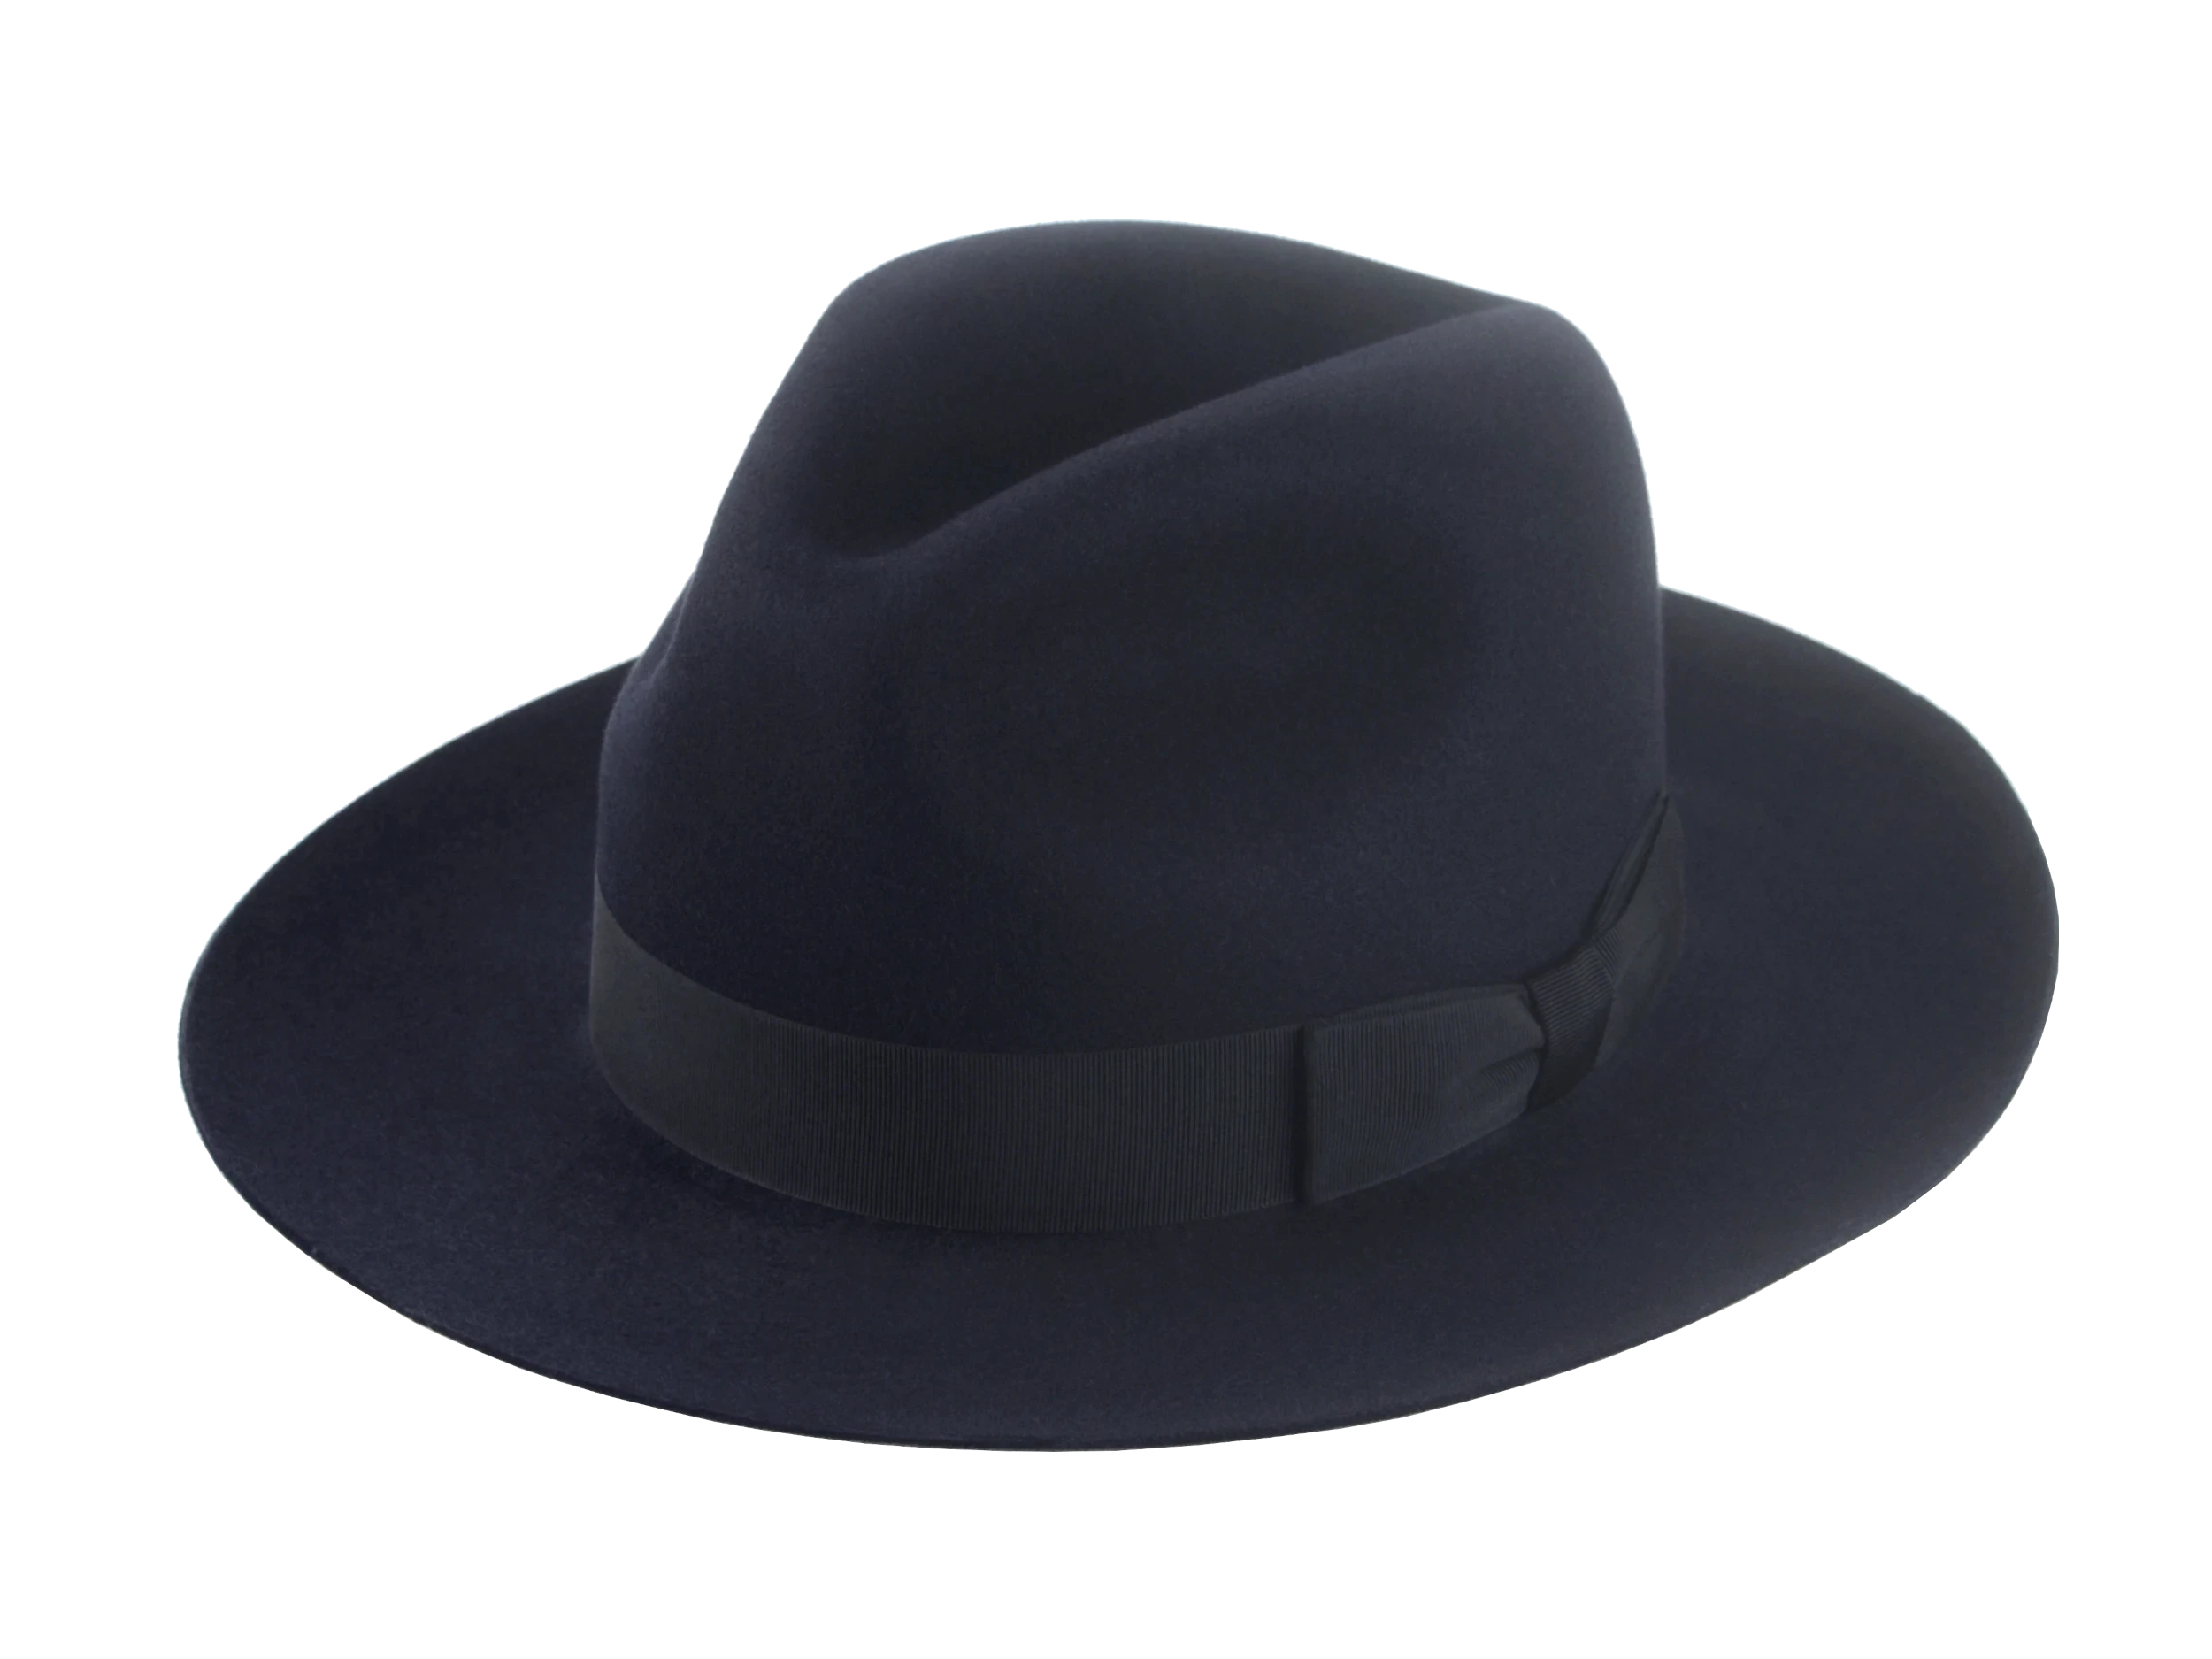 The Brando: Front view highlighting the denim blue color and center-dent crown | Agnoulita Hats